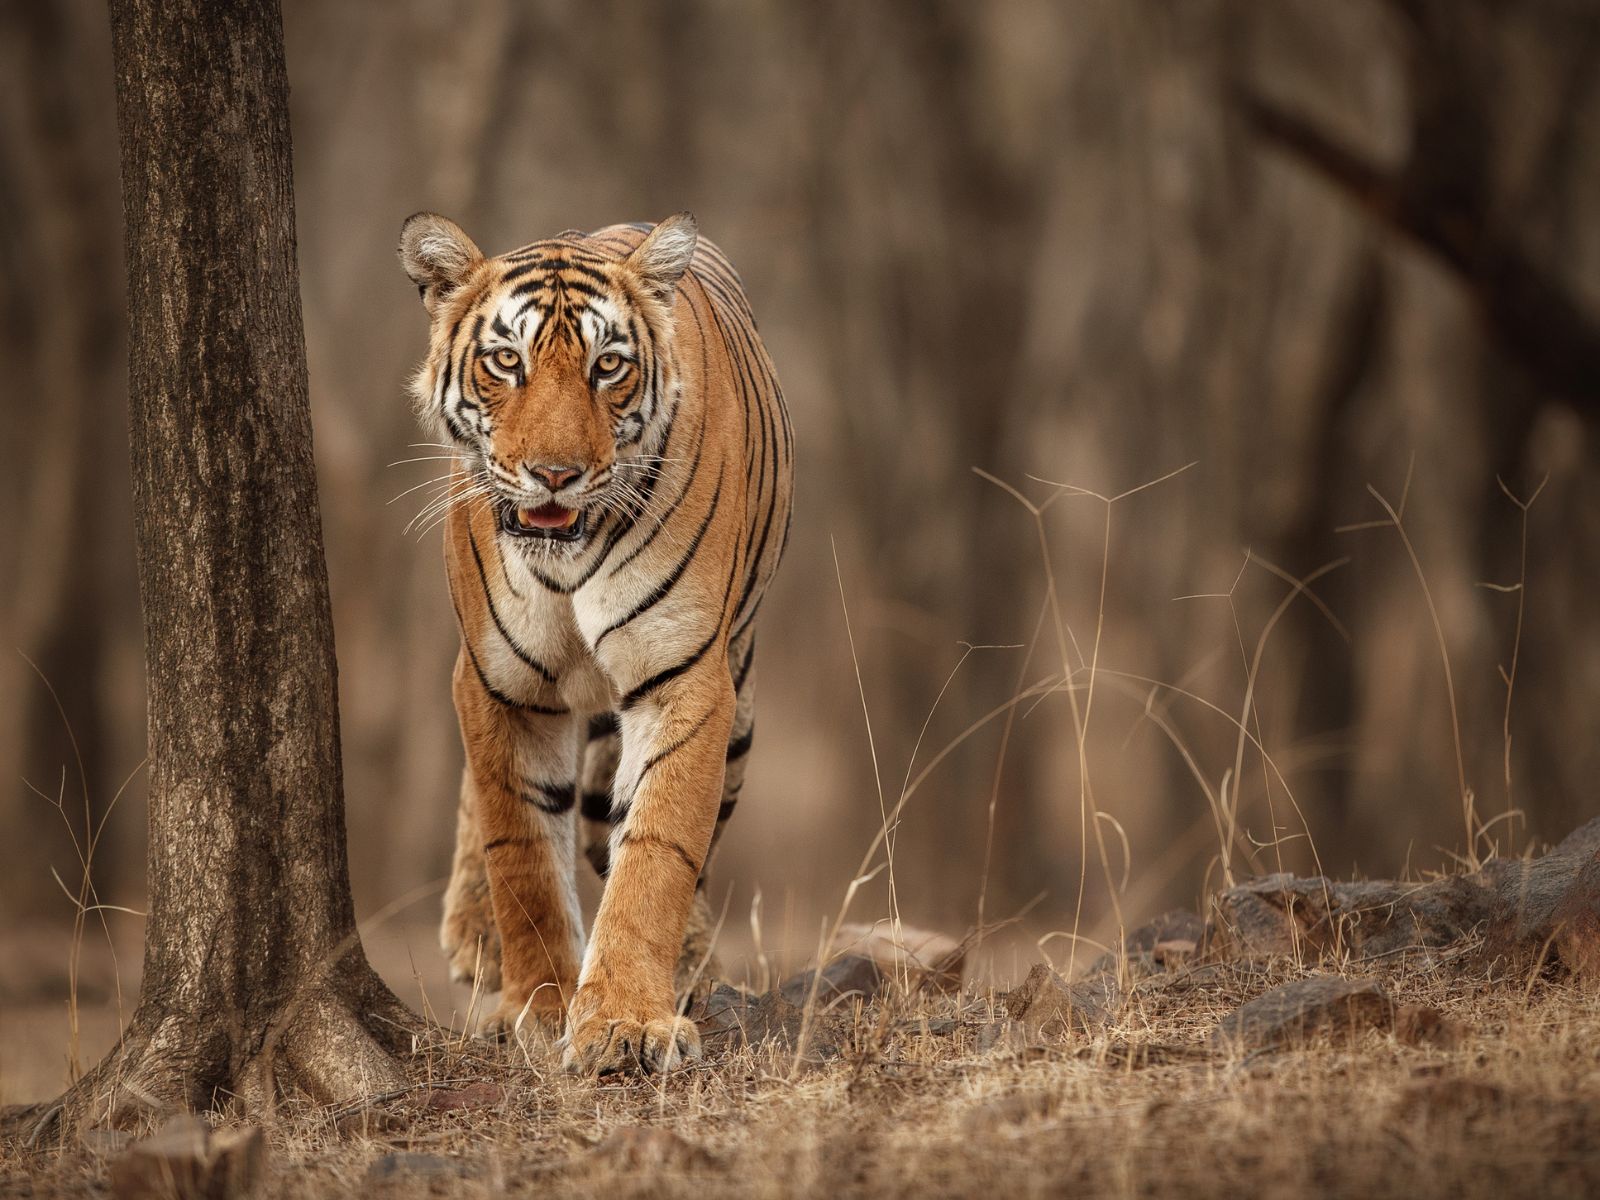 Tigers and Temples of Central India